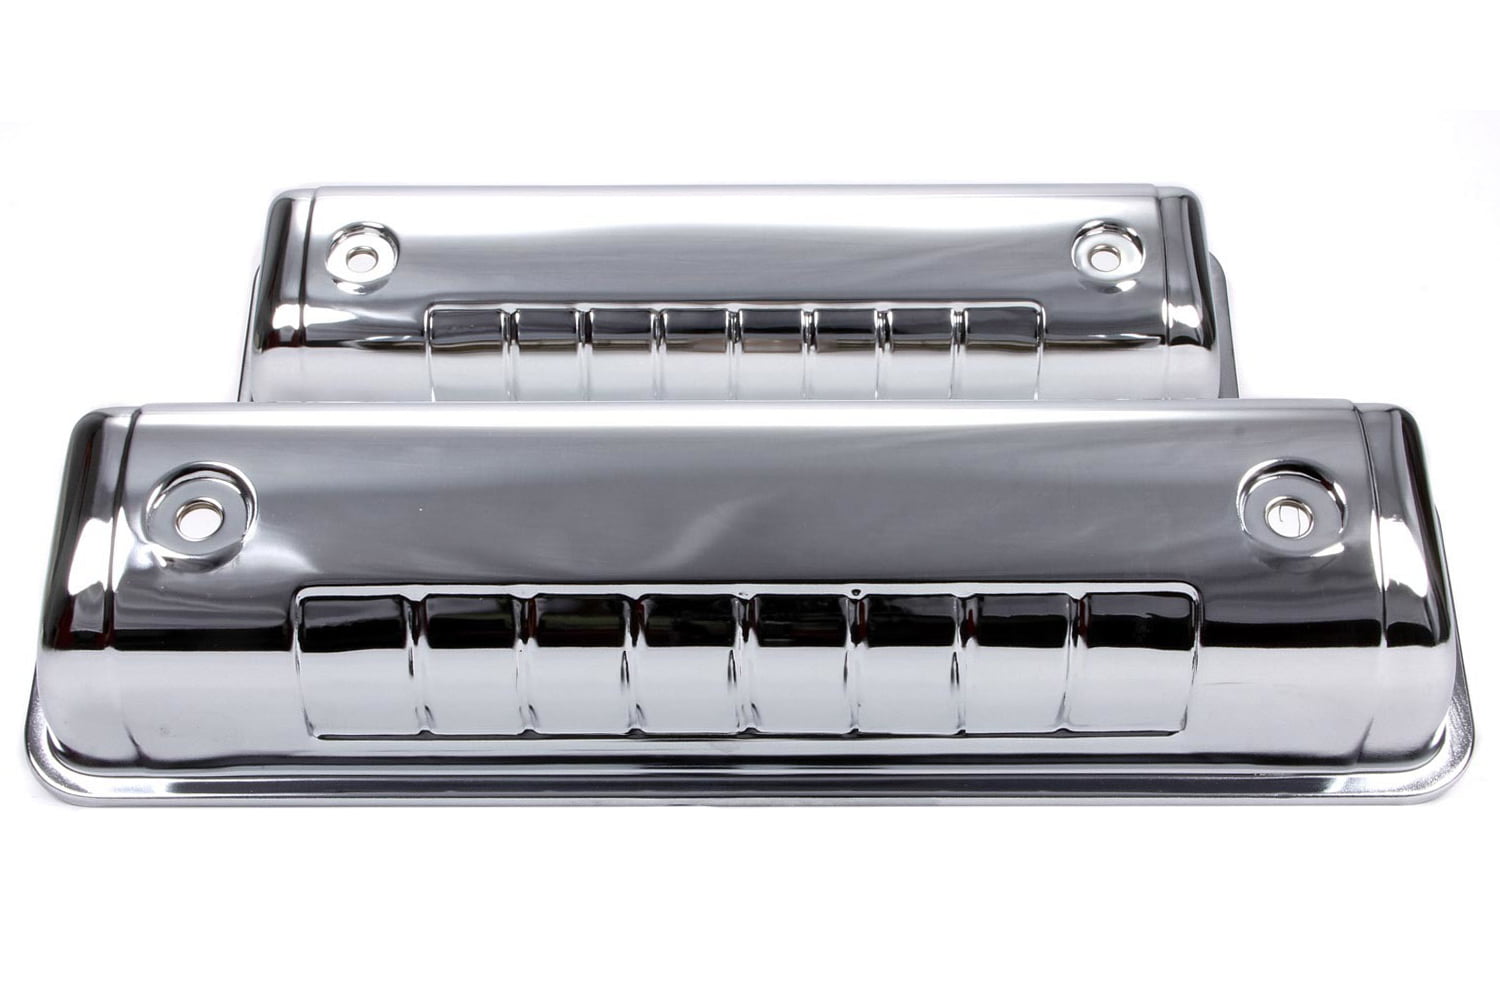 Racing Power Company R7541 Tall Chrome Y Block Valve Cover for Ford V8 